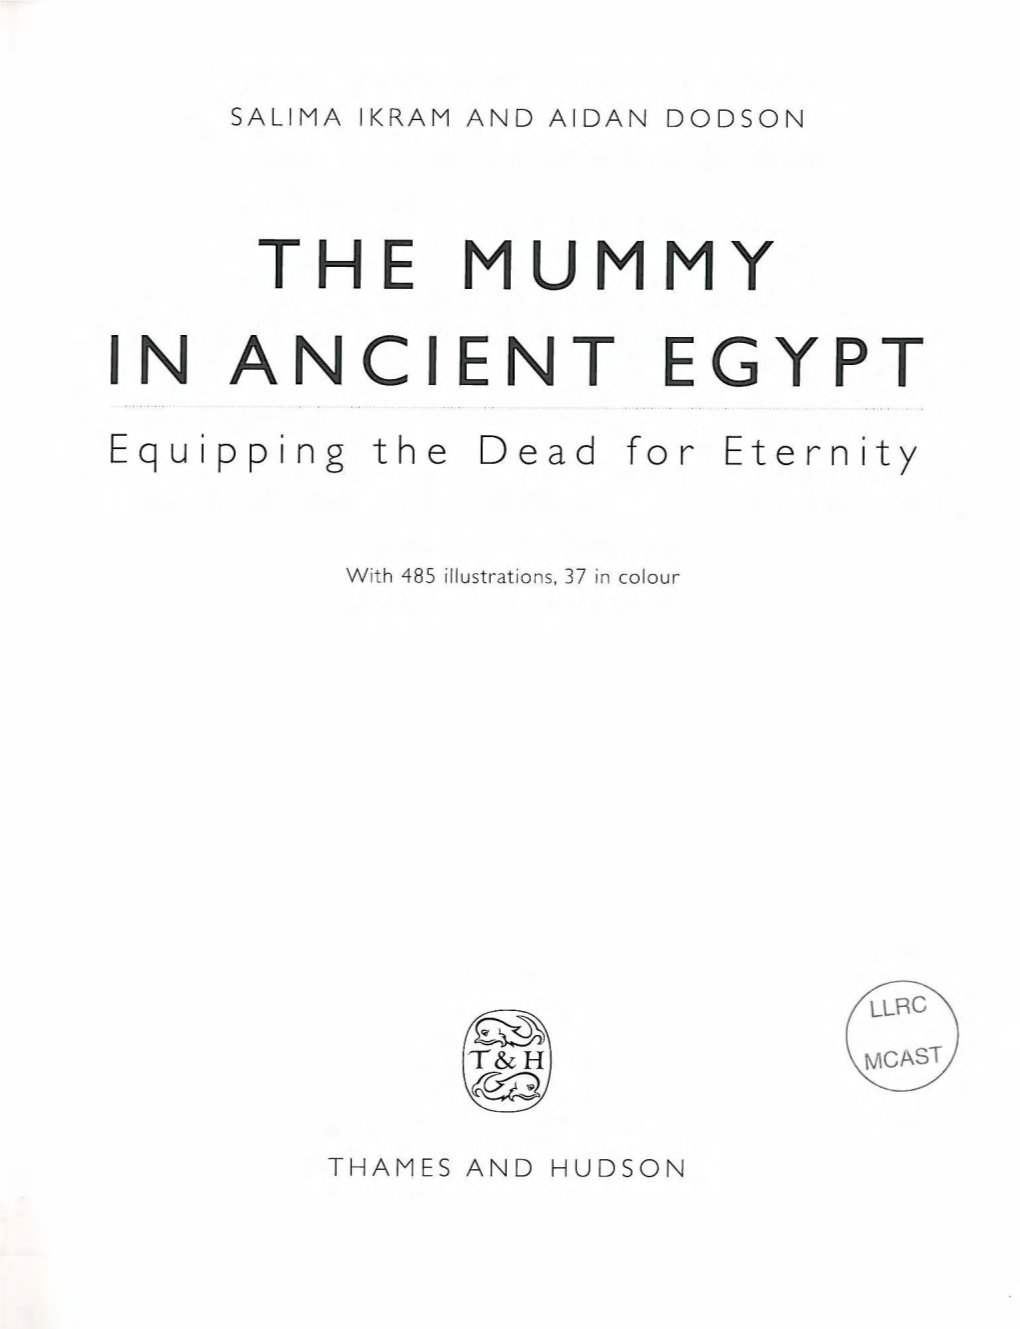 The Mummy in Ancient Egypt